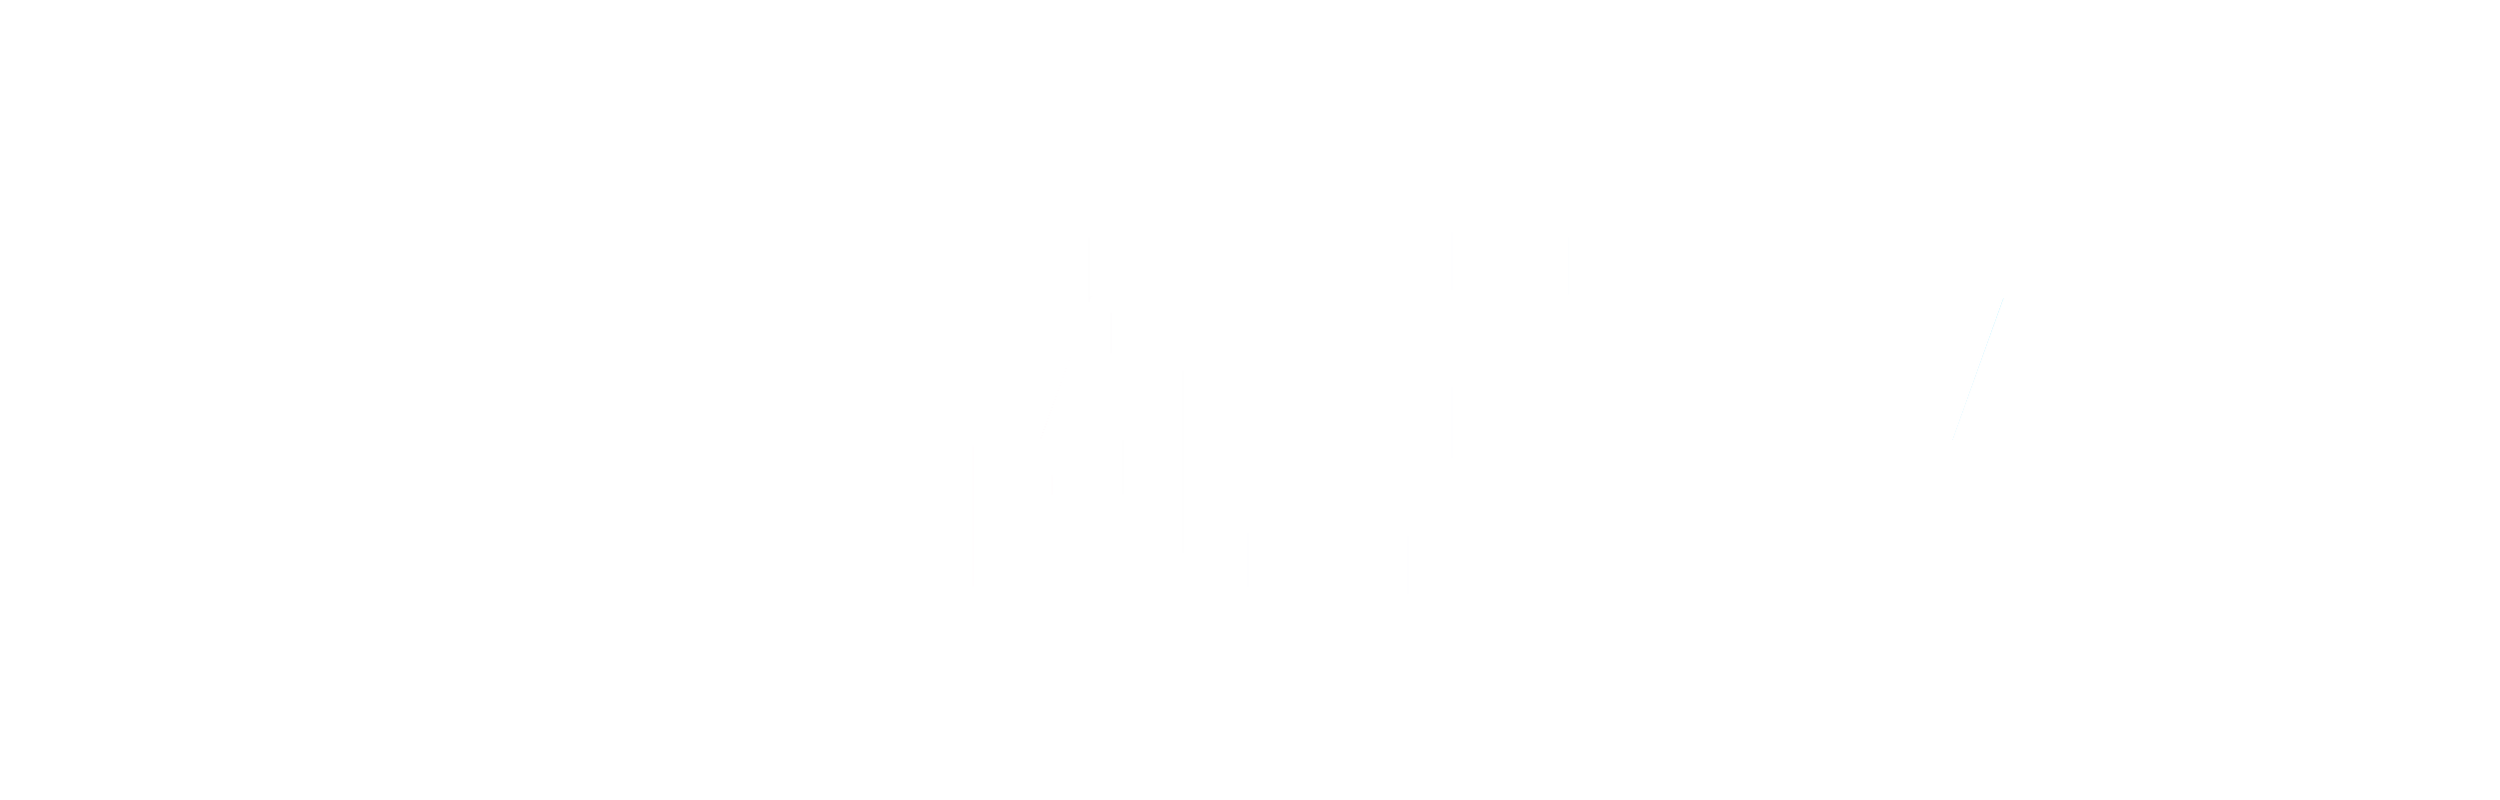 astar white.png